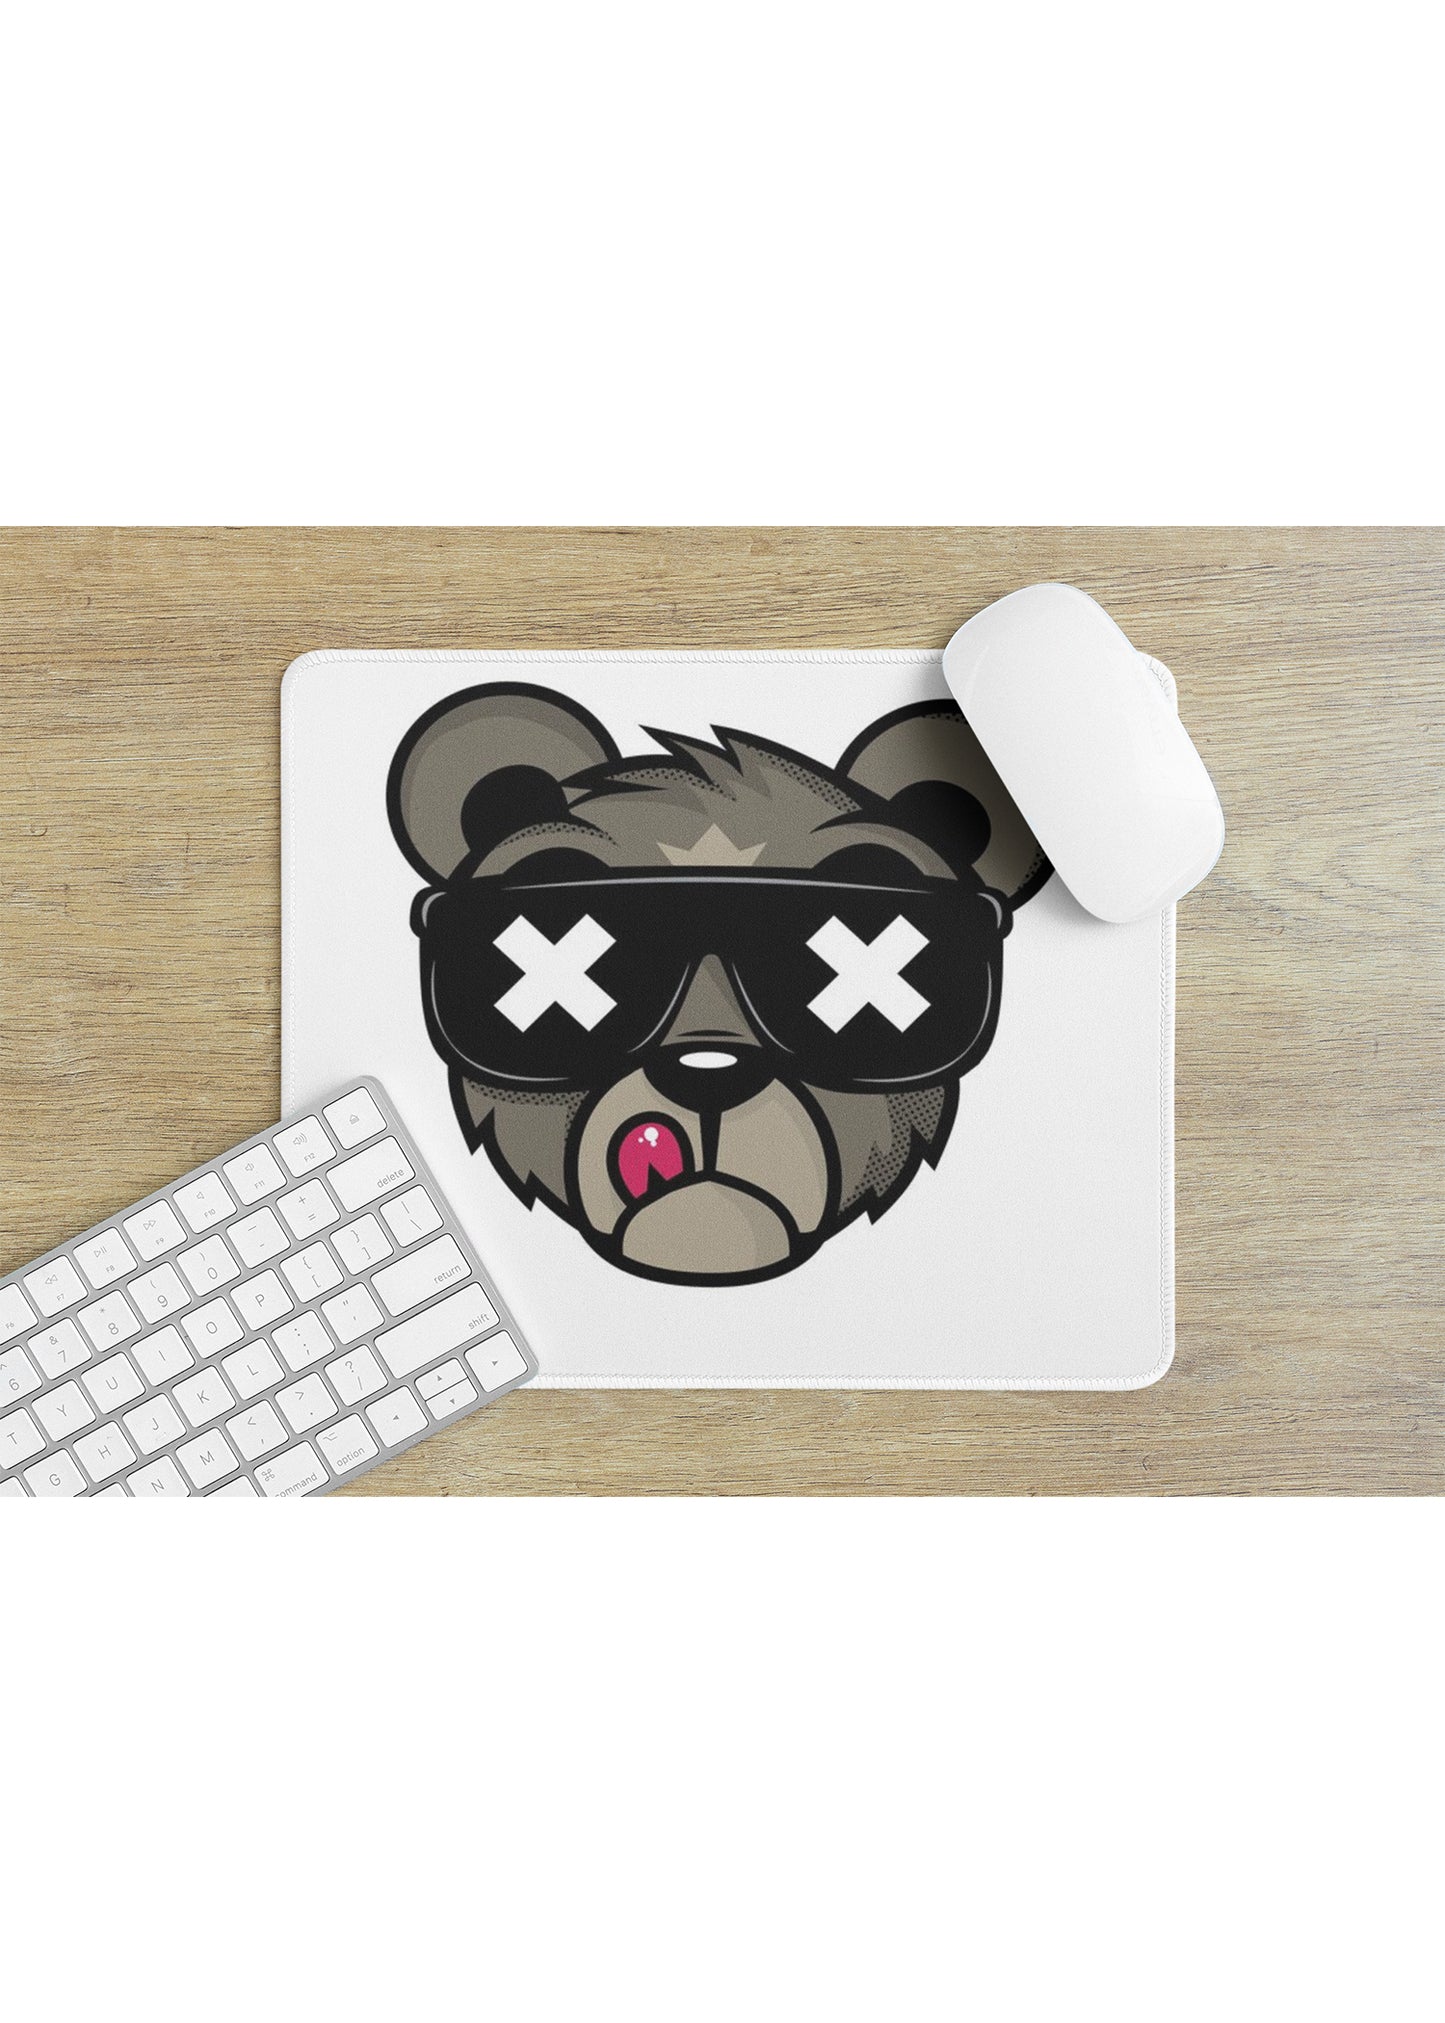 PUPPY MOUSE PAD